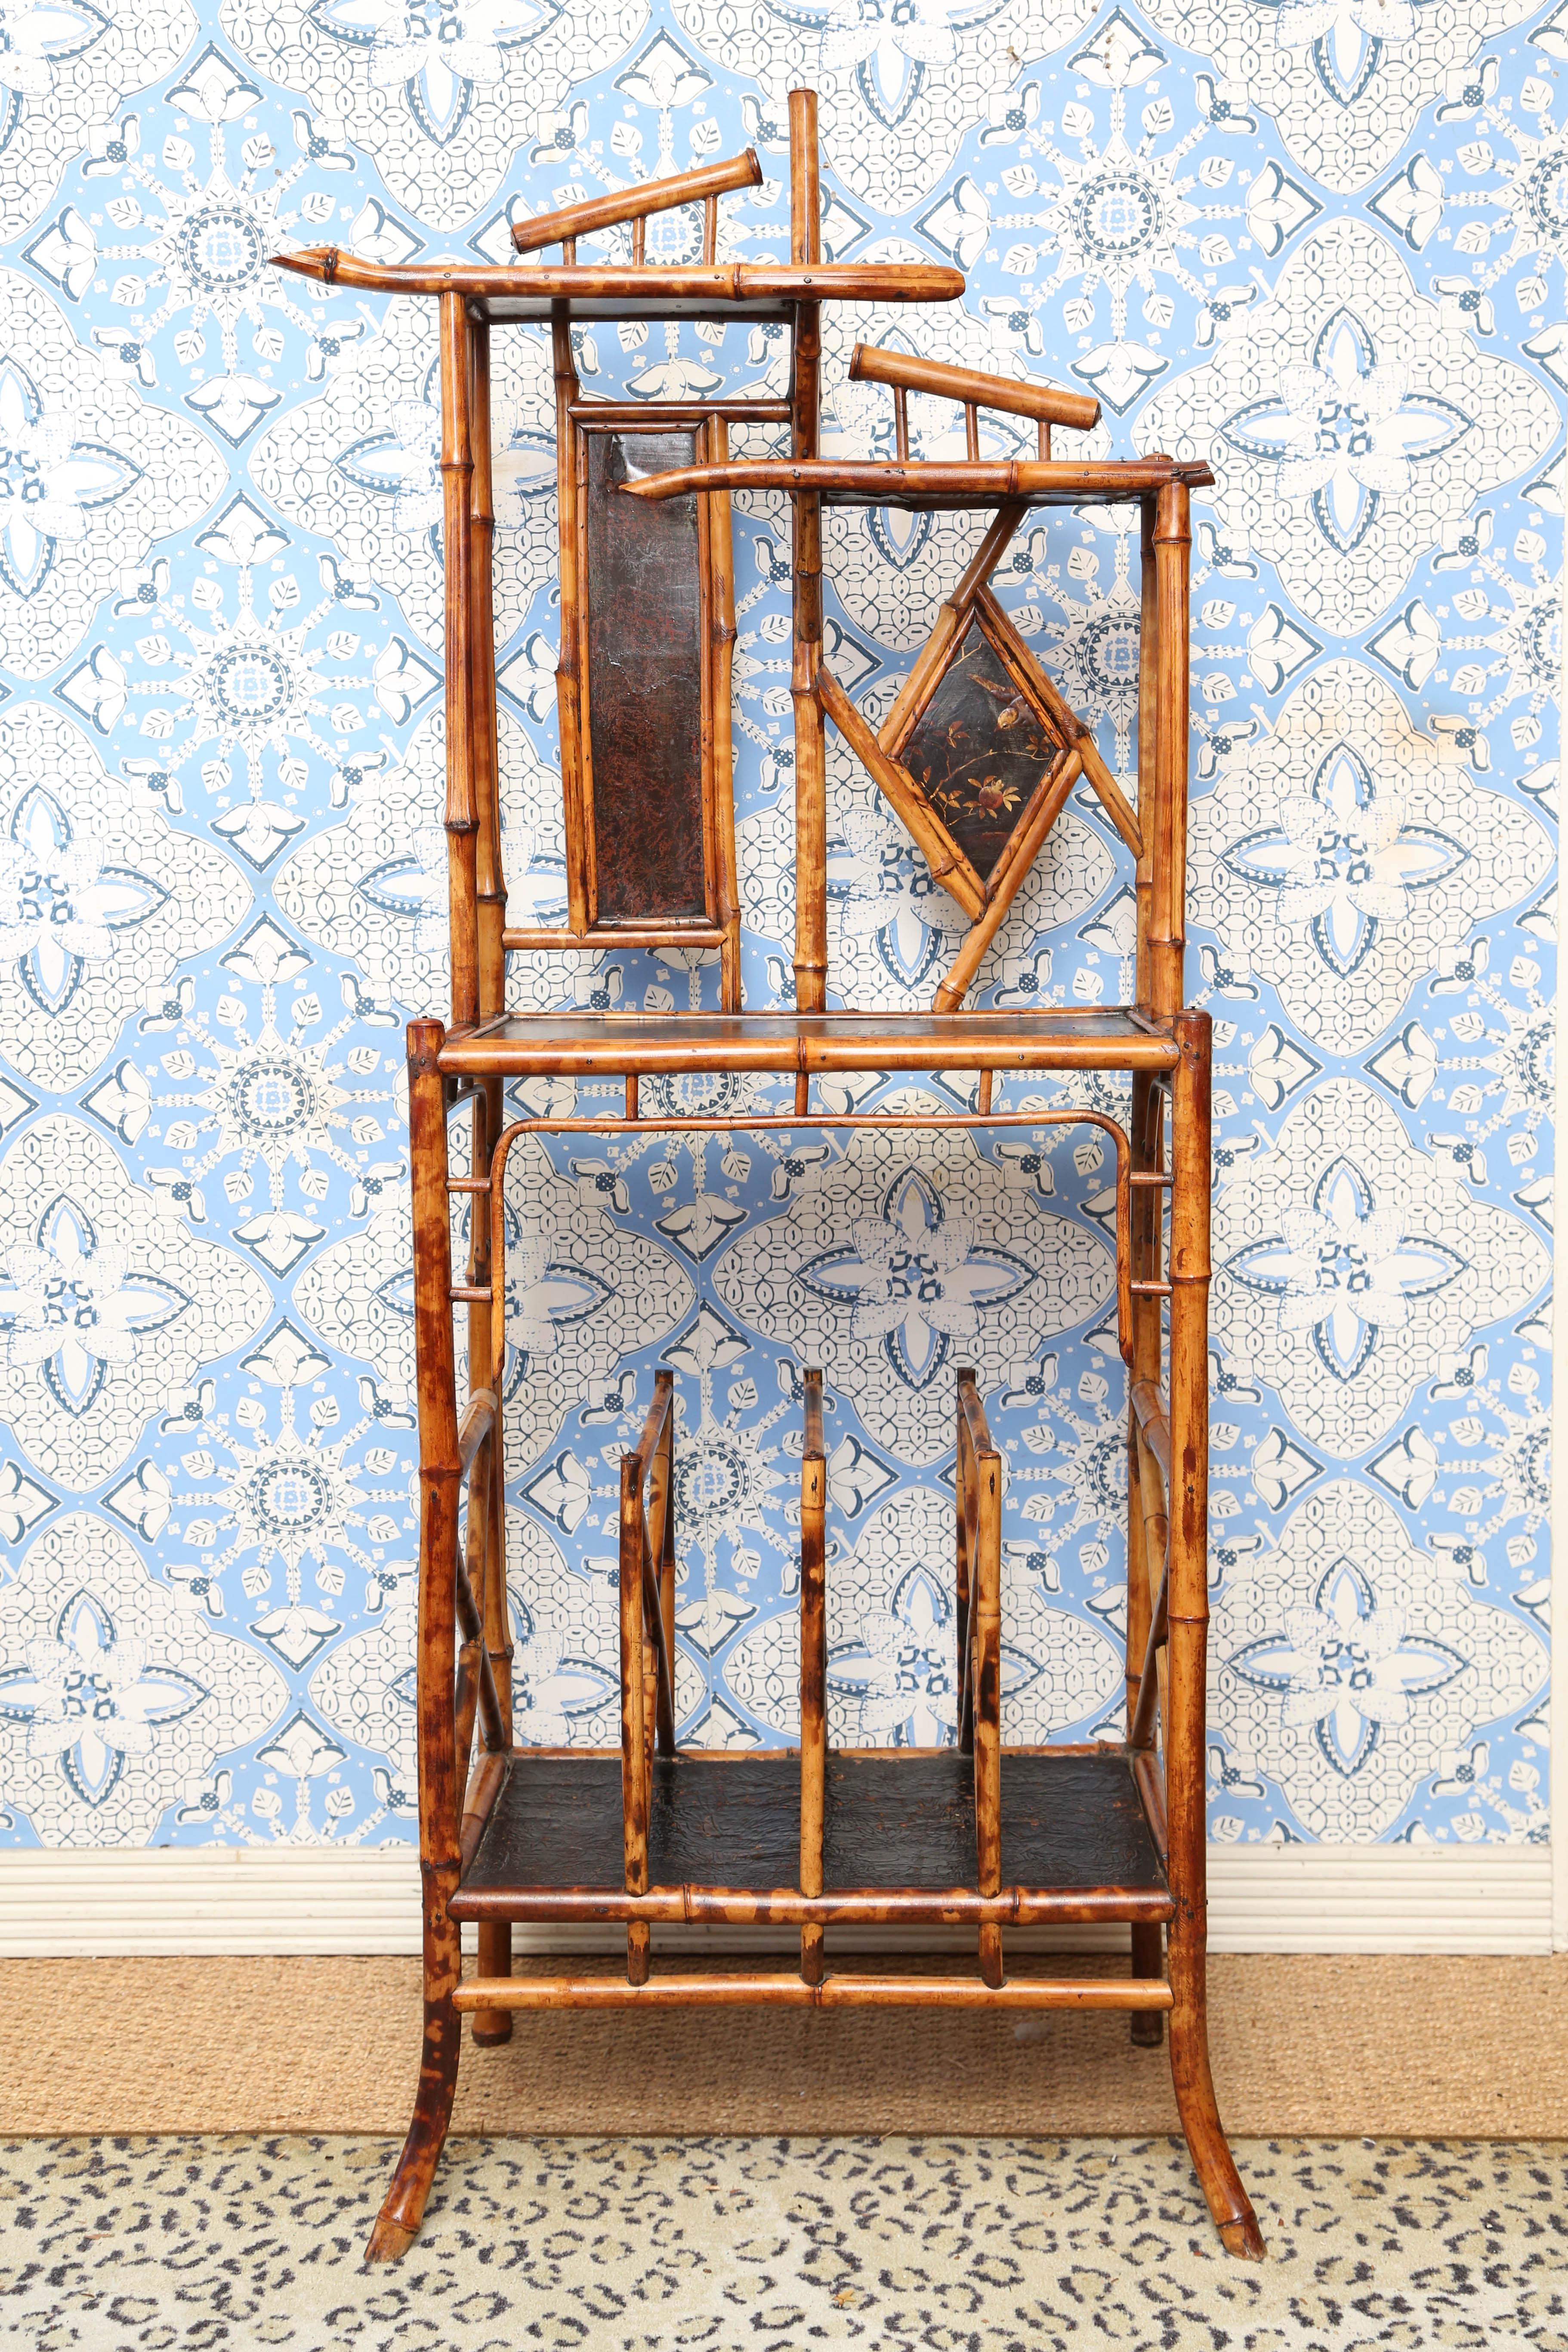 Superb 19th century English Bamboo Magazine rack with tabletop with Japanese figurines and leather paper.